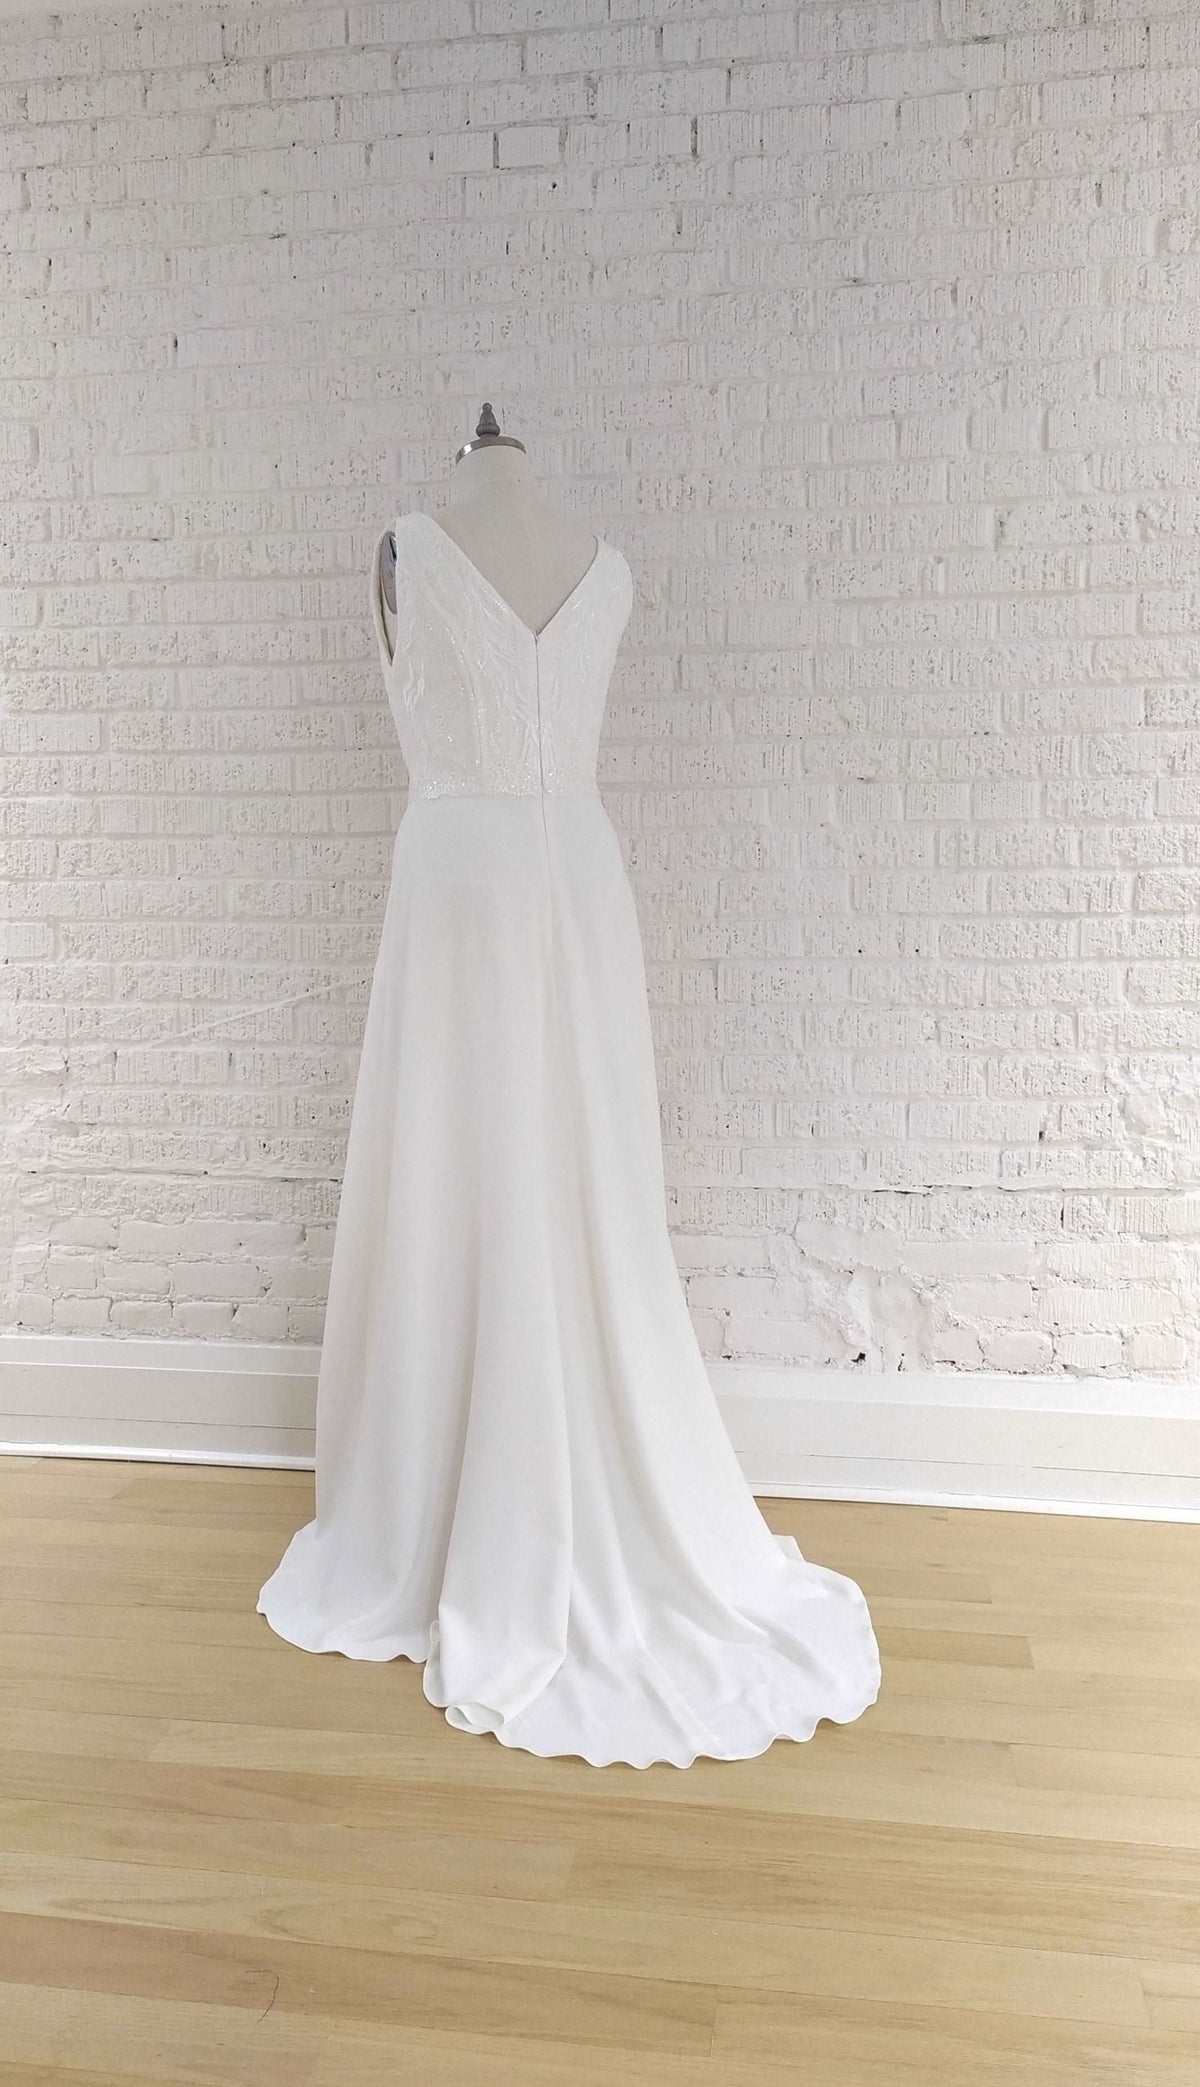 Shop Toronto bridal. Off the rack wedding dress. Size US 14. Crepe fit and flare simple wedding gown. Handmade in  our Toronto bridal boutique..